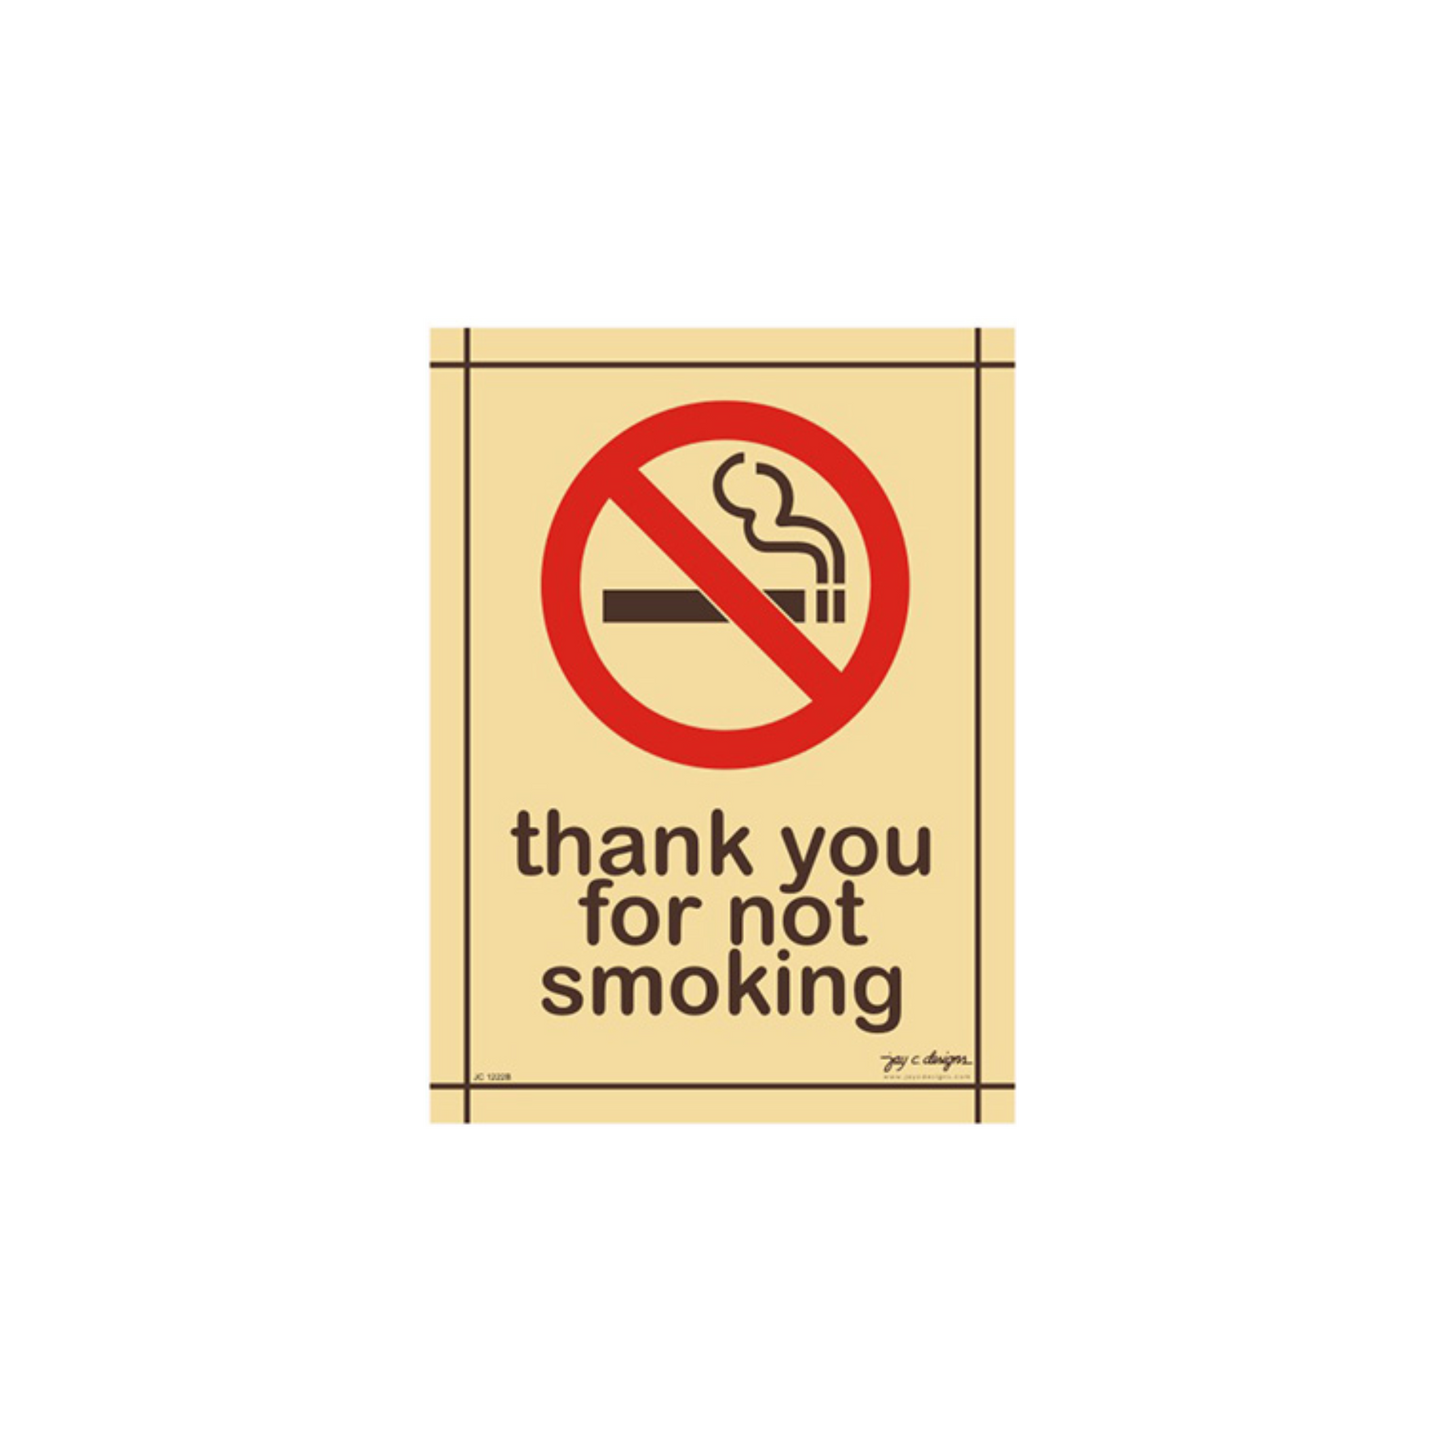 Thank You For Not Smoking Acrylic Signage